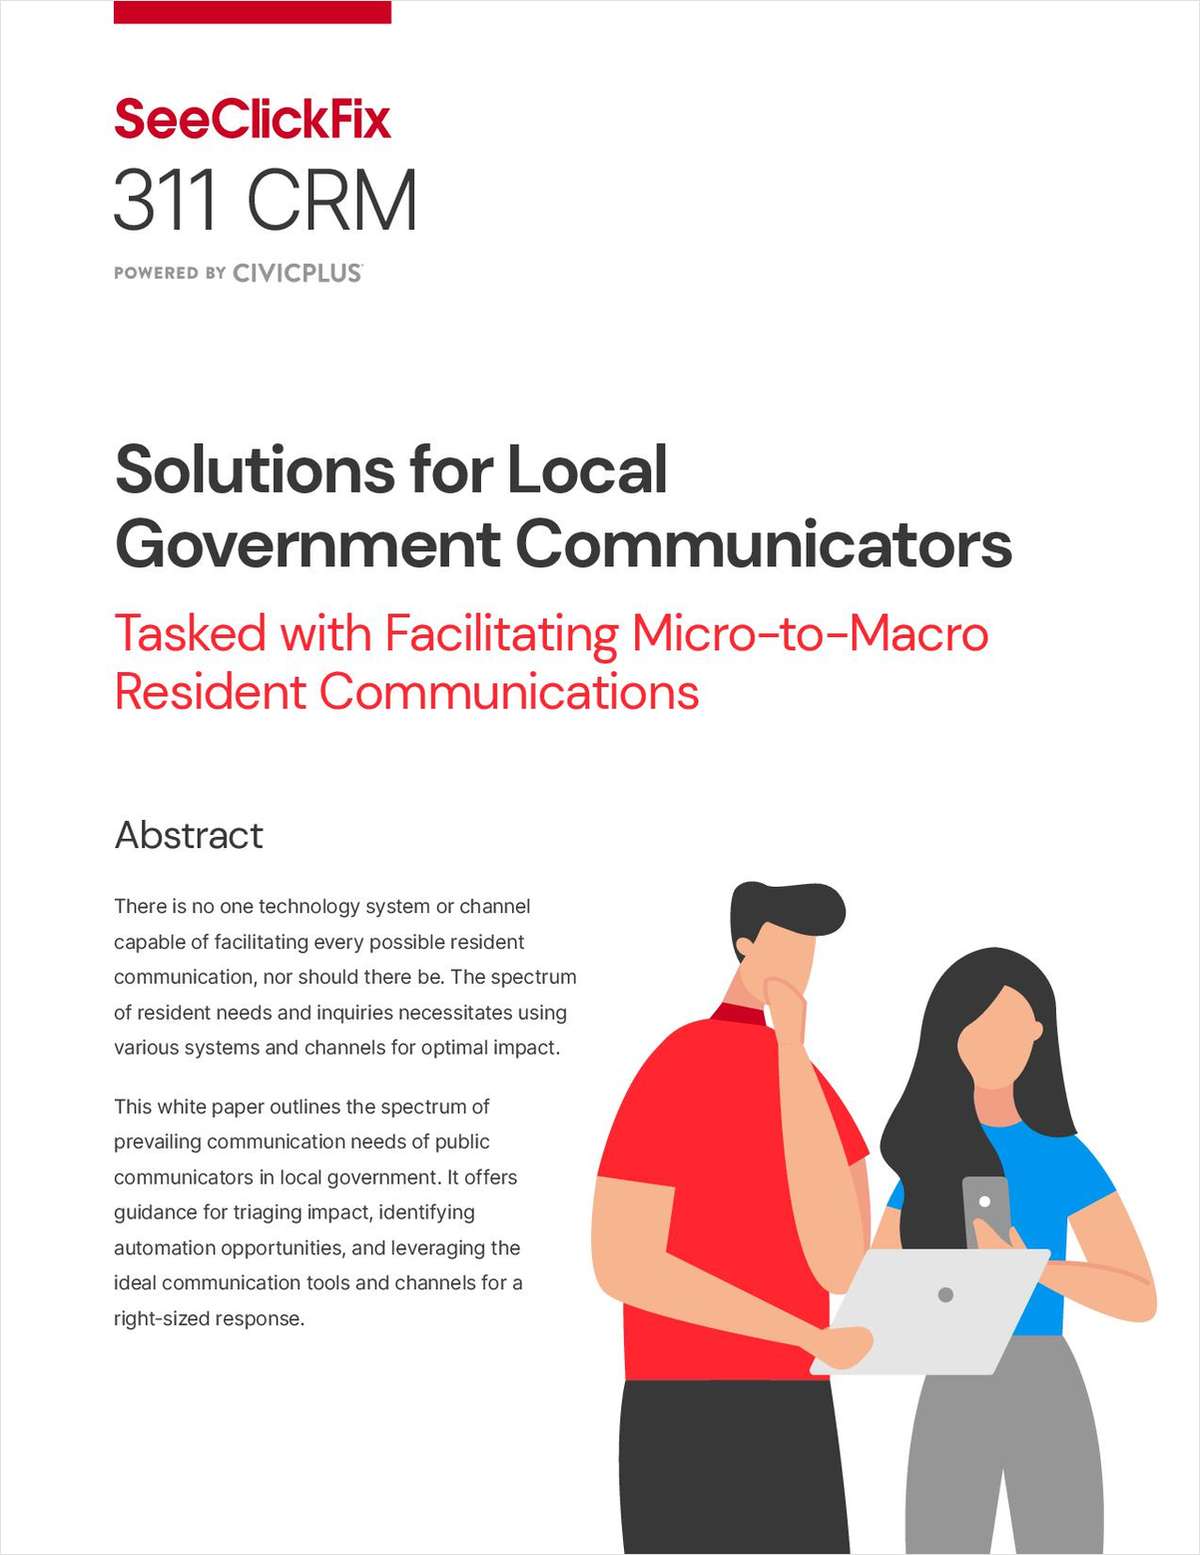 Solutions for Local Government Communicators Tasked with Facilitating Micro-to-Macro Resident Communications